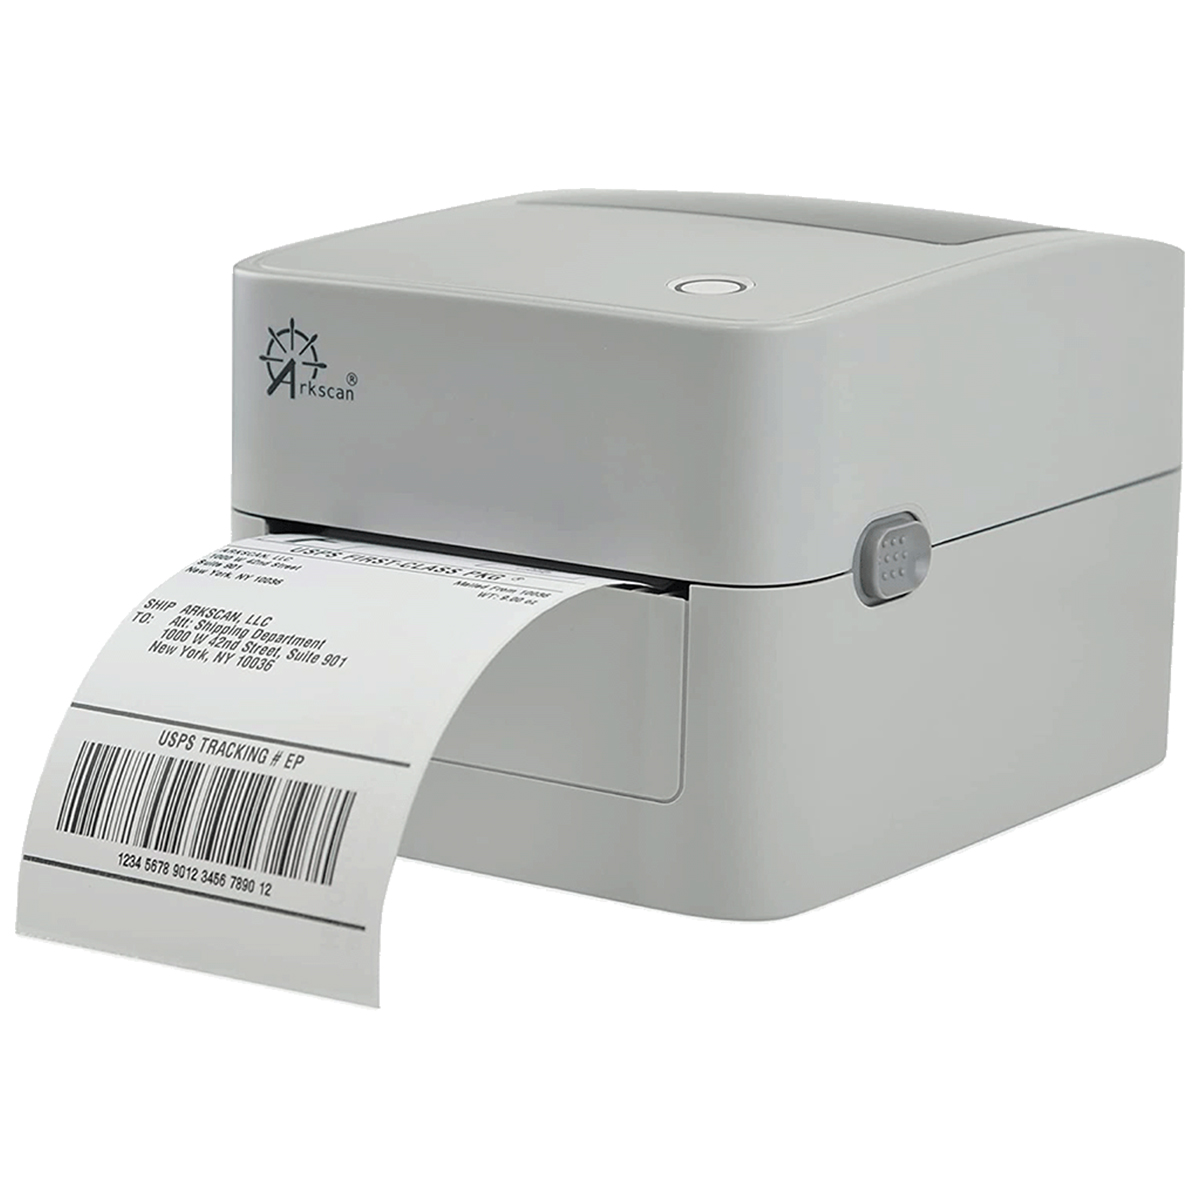 White Direct Thermal Zebra LP2844 Zp-450 Zp-500 Zp-505 & Zebra Compatible Printers for Arkscan 2054A Arkscan SL450 4x6 Shipping Label in 4 Rolls 450 Pages per roll 